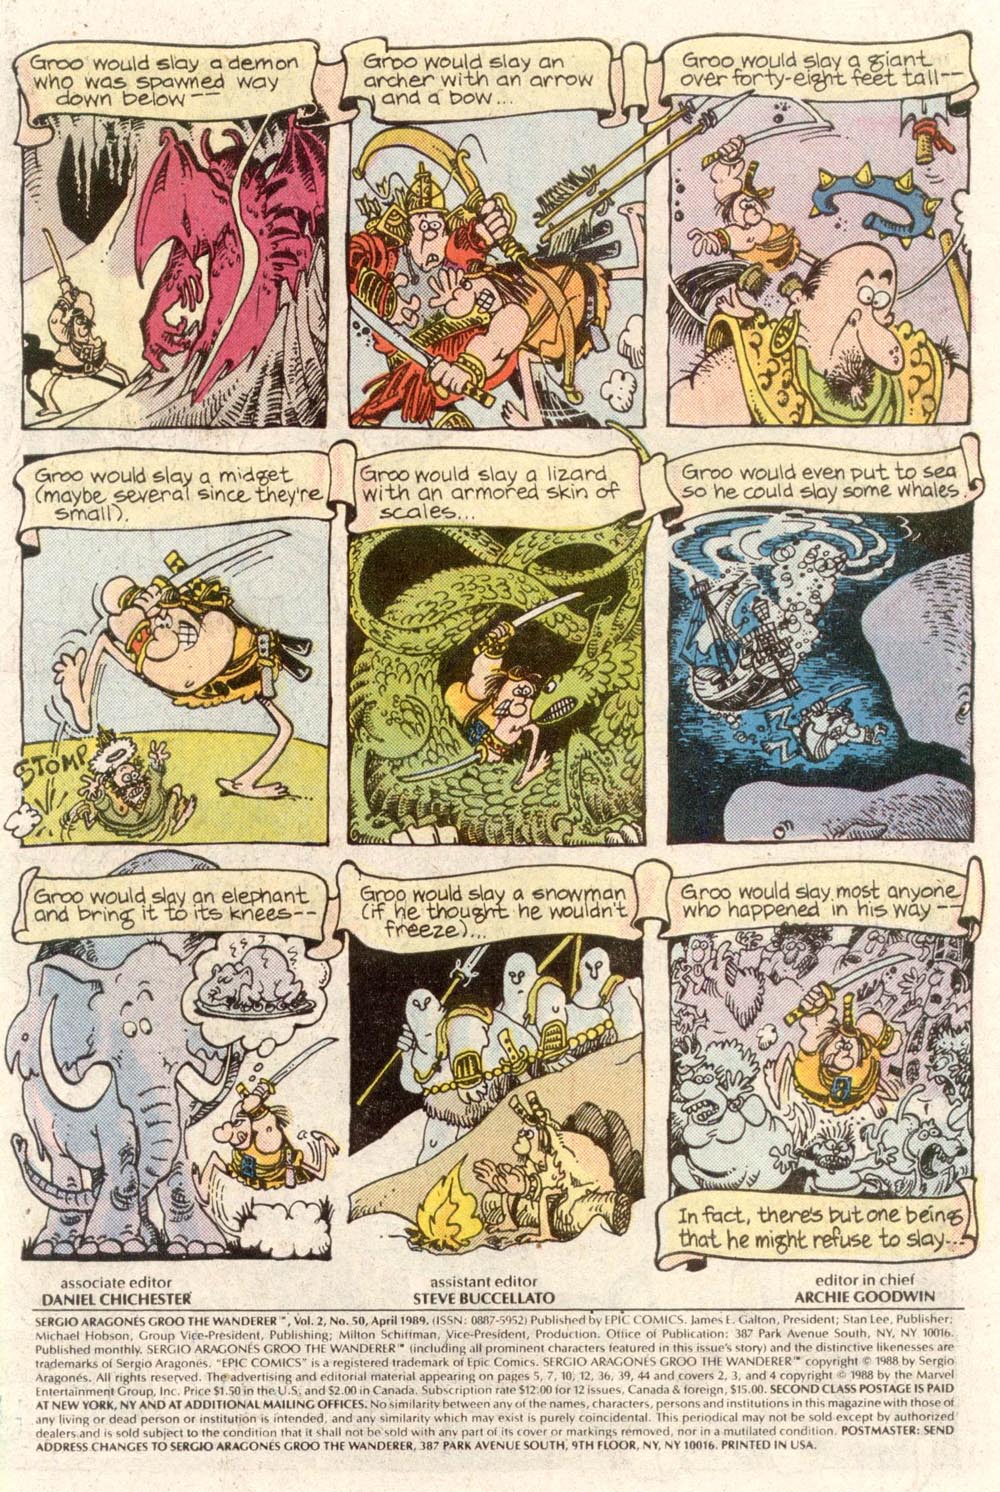 Archie Comics Midget - Sergio Aragones Groo The Wanderer Issue 50 | Read Sergio Aragones Groo The  Wanderer Issue 50 comic online in high quality. Read Full Comic online for  free - Read comics online in